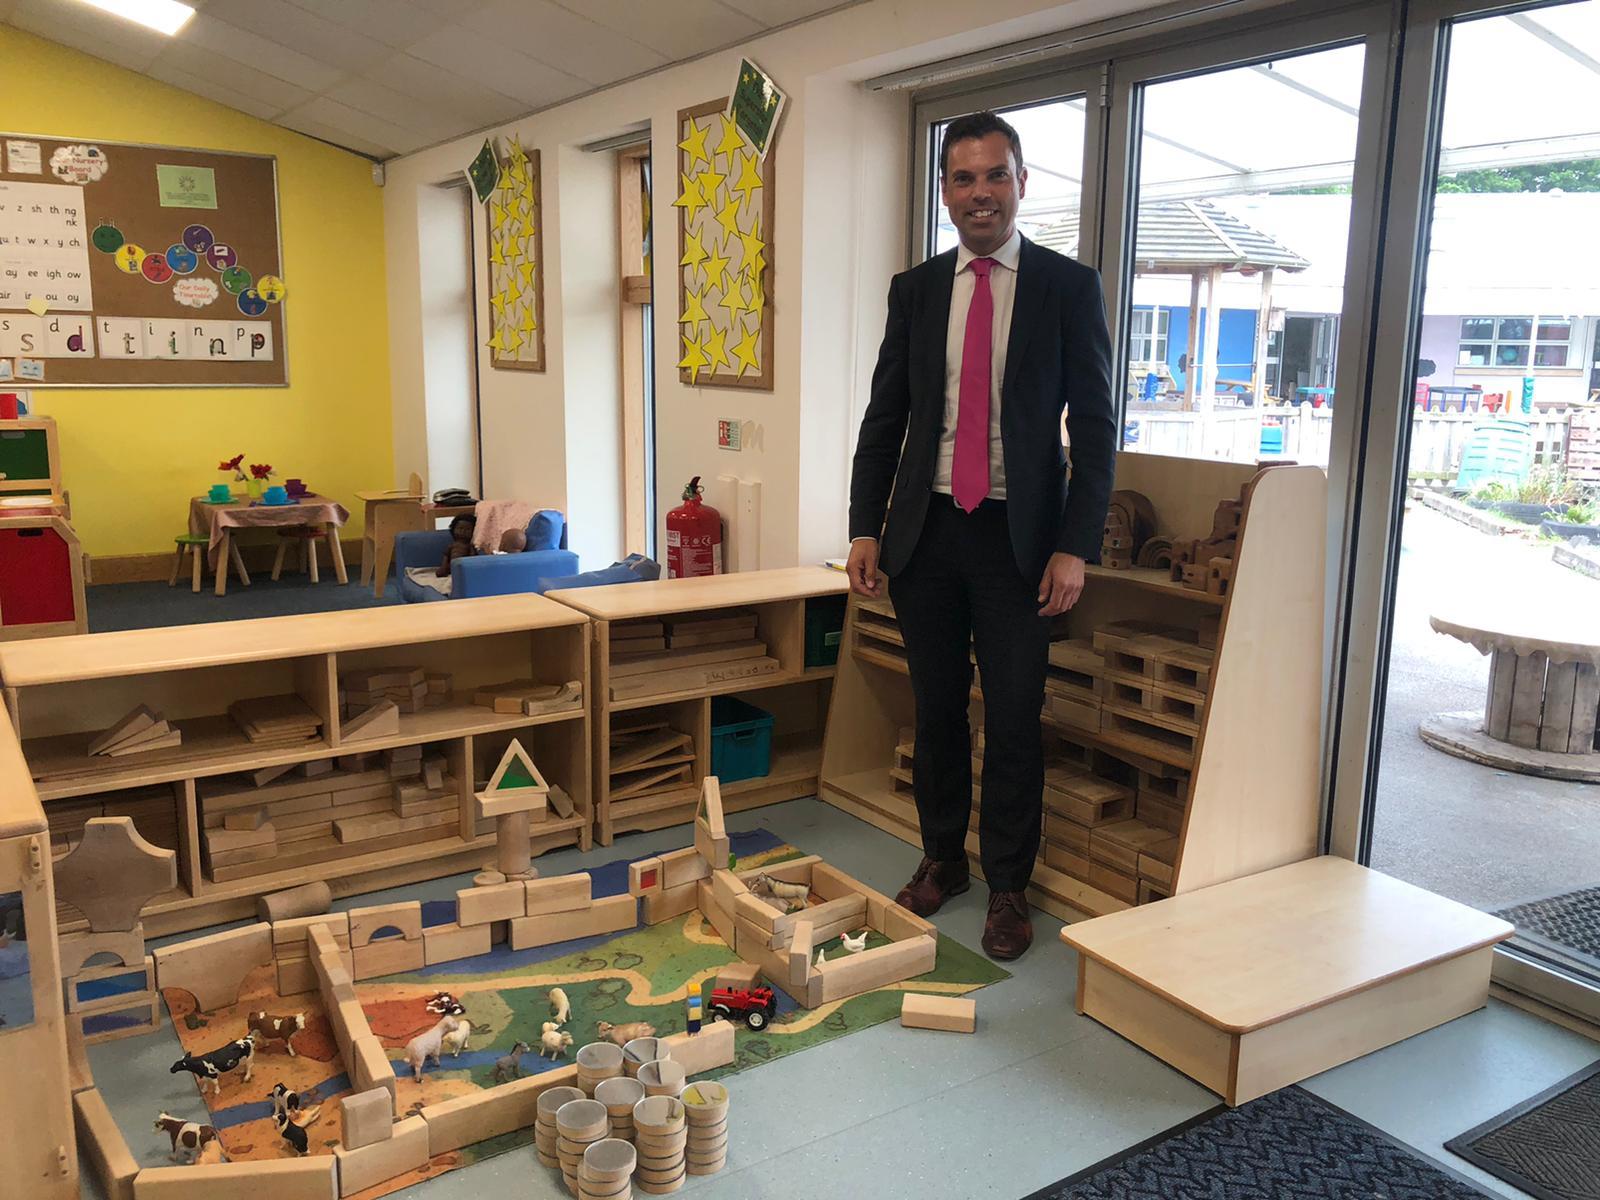 Ken Skates at Rhosymedre CP School in his role on the Senedds Children, Young People and Education Committee.